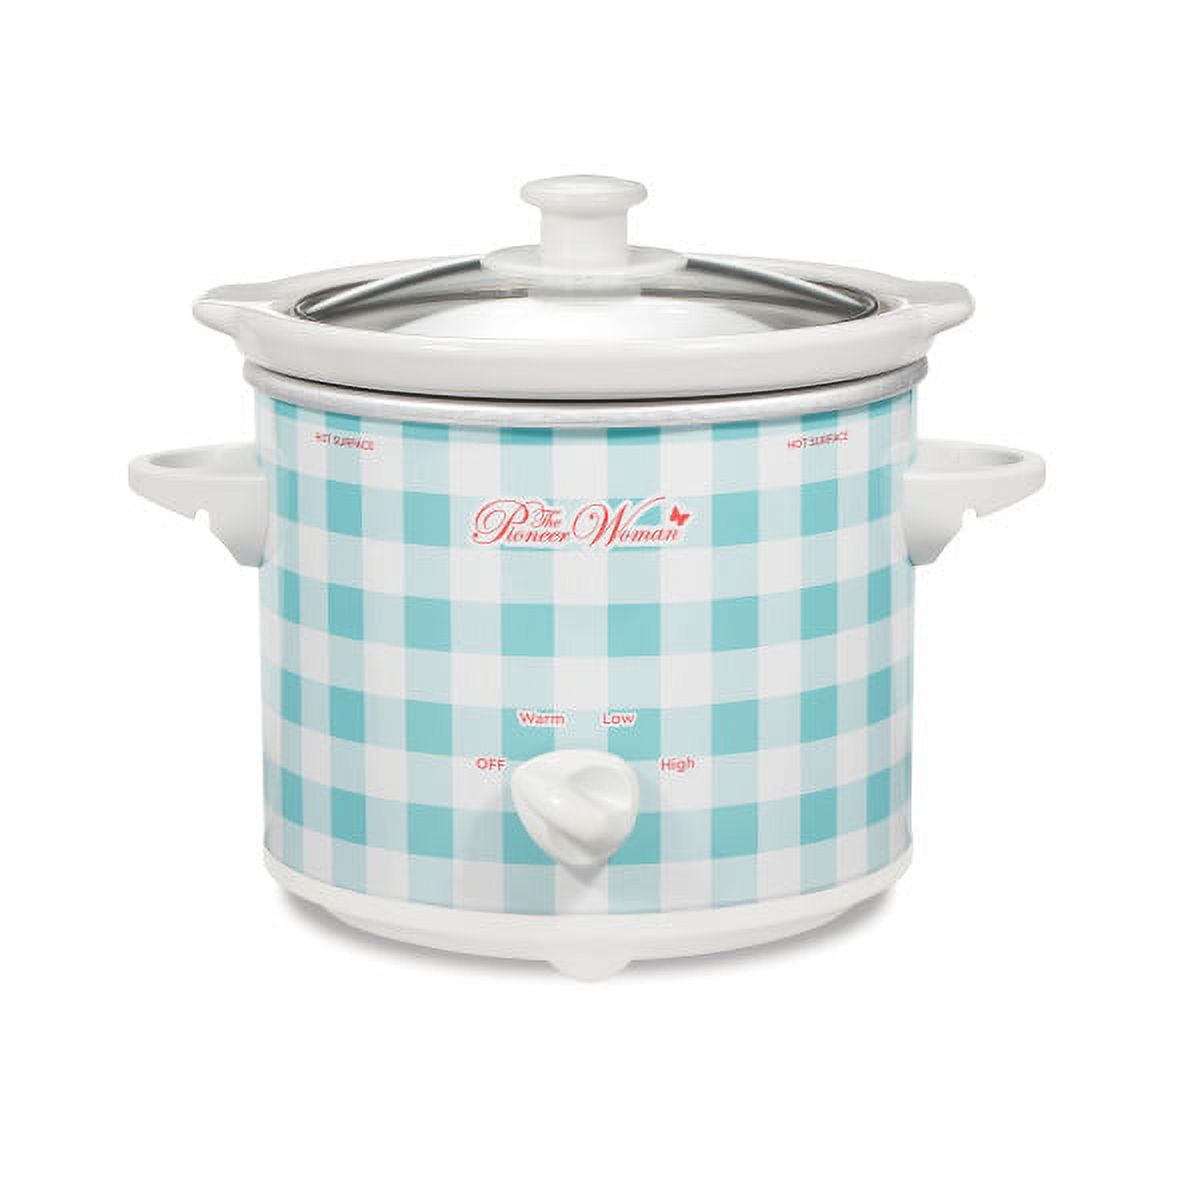 The Pioneer Woman Slow Cooker 1.5 Quart Twin Pack, Breezy Blossom and Teal Gingham, 33018 - image 4 of 10